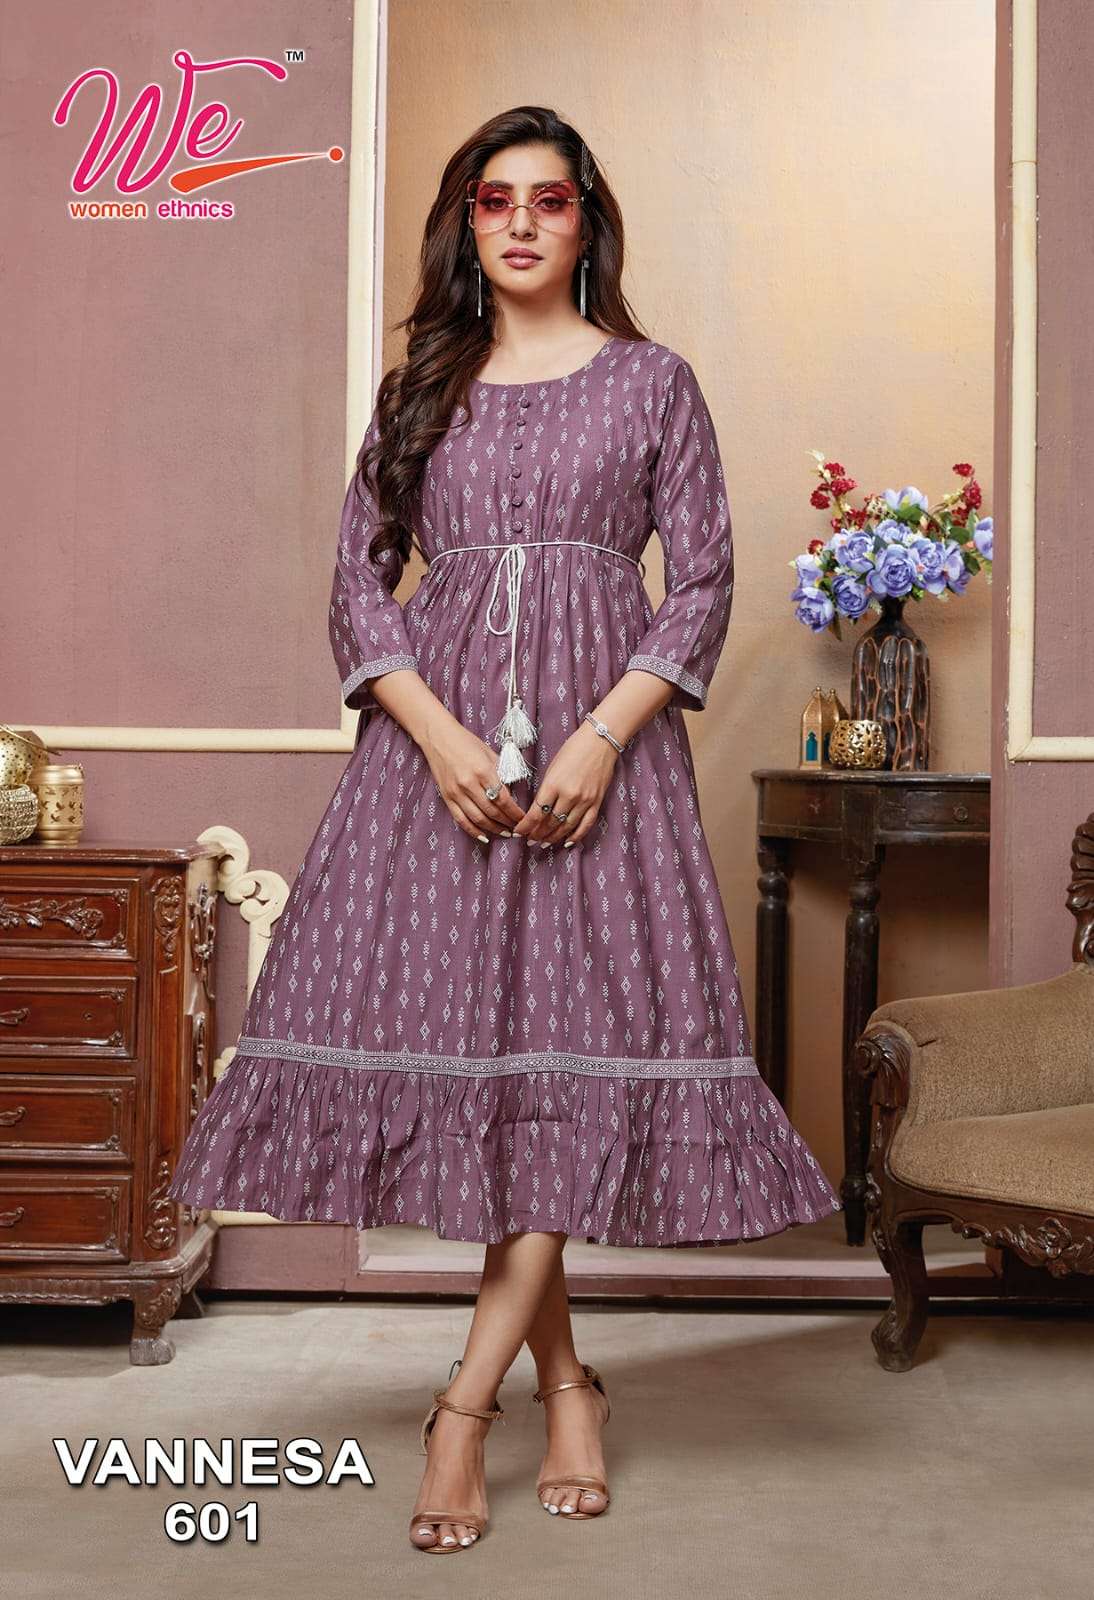 Latest Cotton Kurti Designs for Women to try | Libas